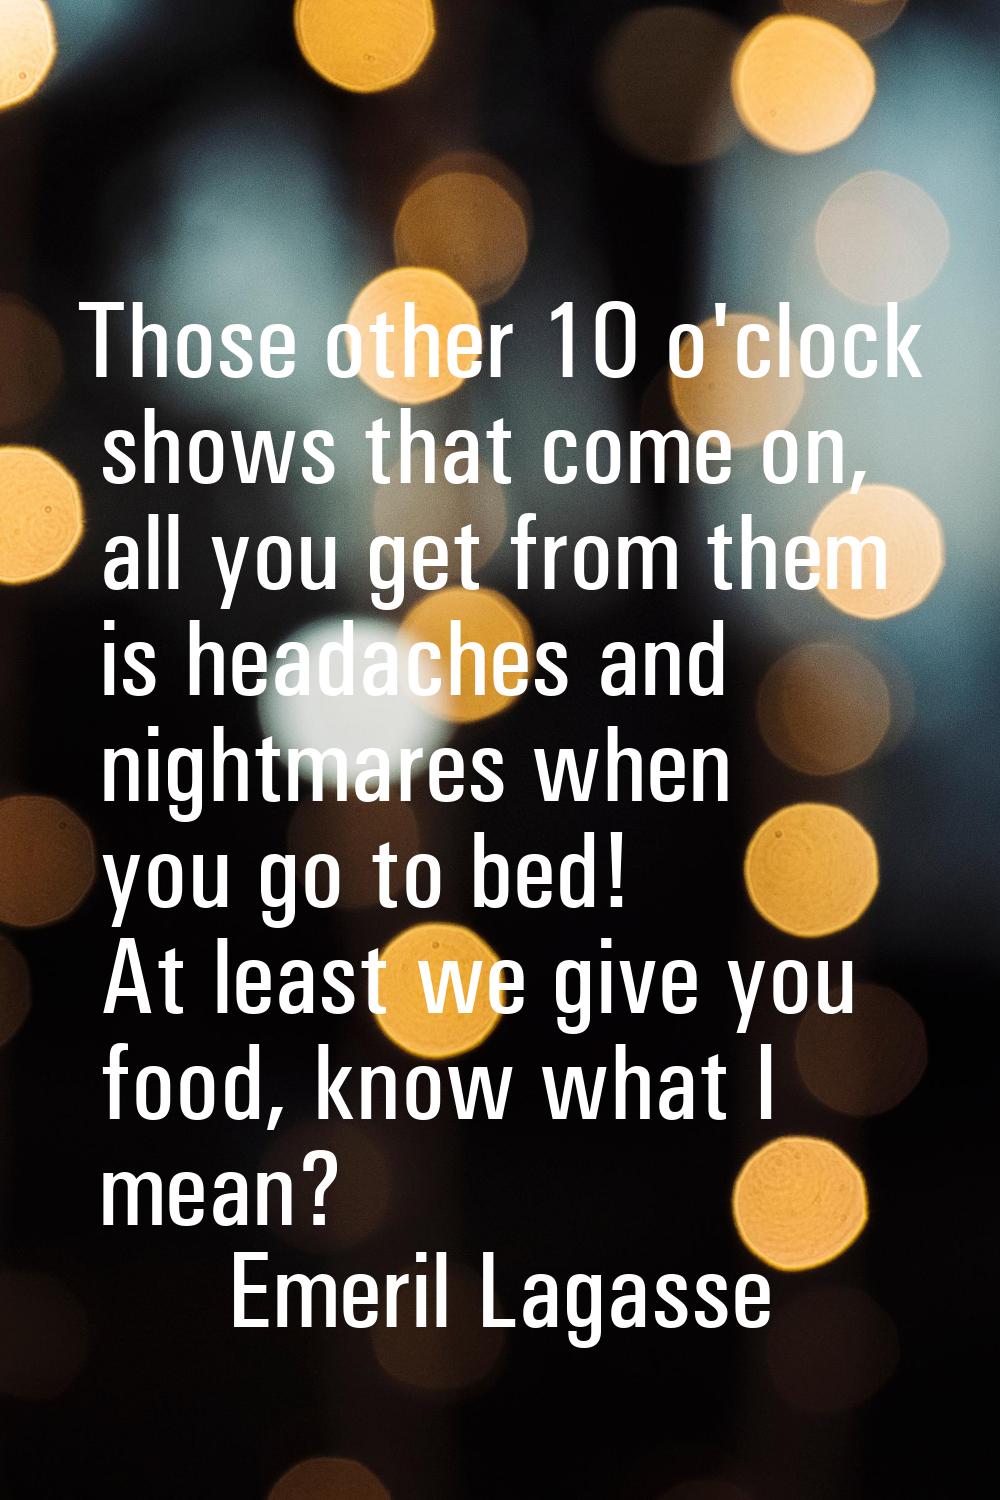 Those other 10 o'clock shows that come on, all you get from them is headaches and nightmares when y